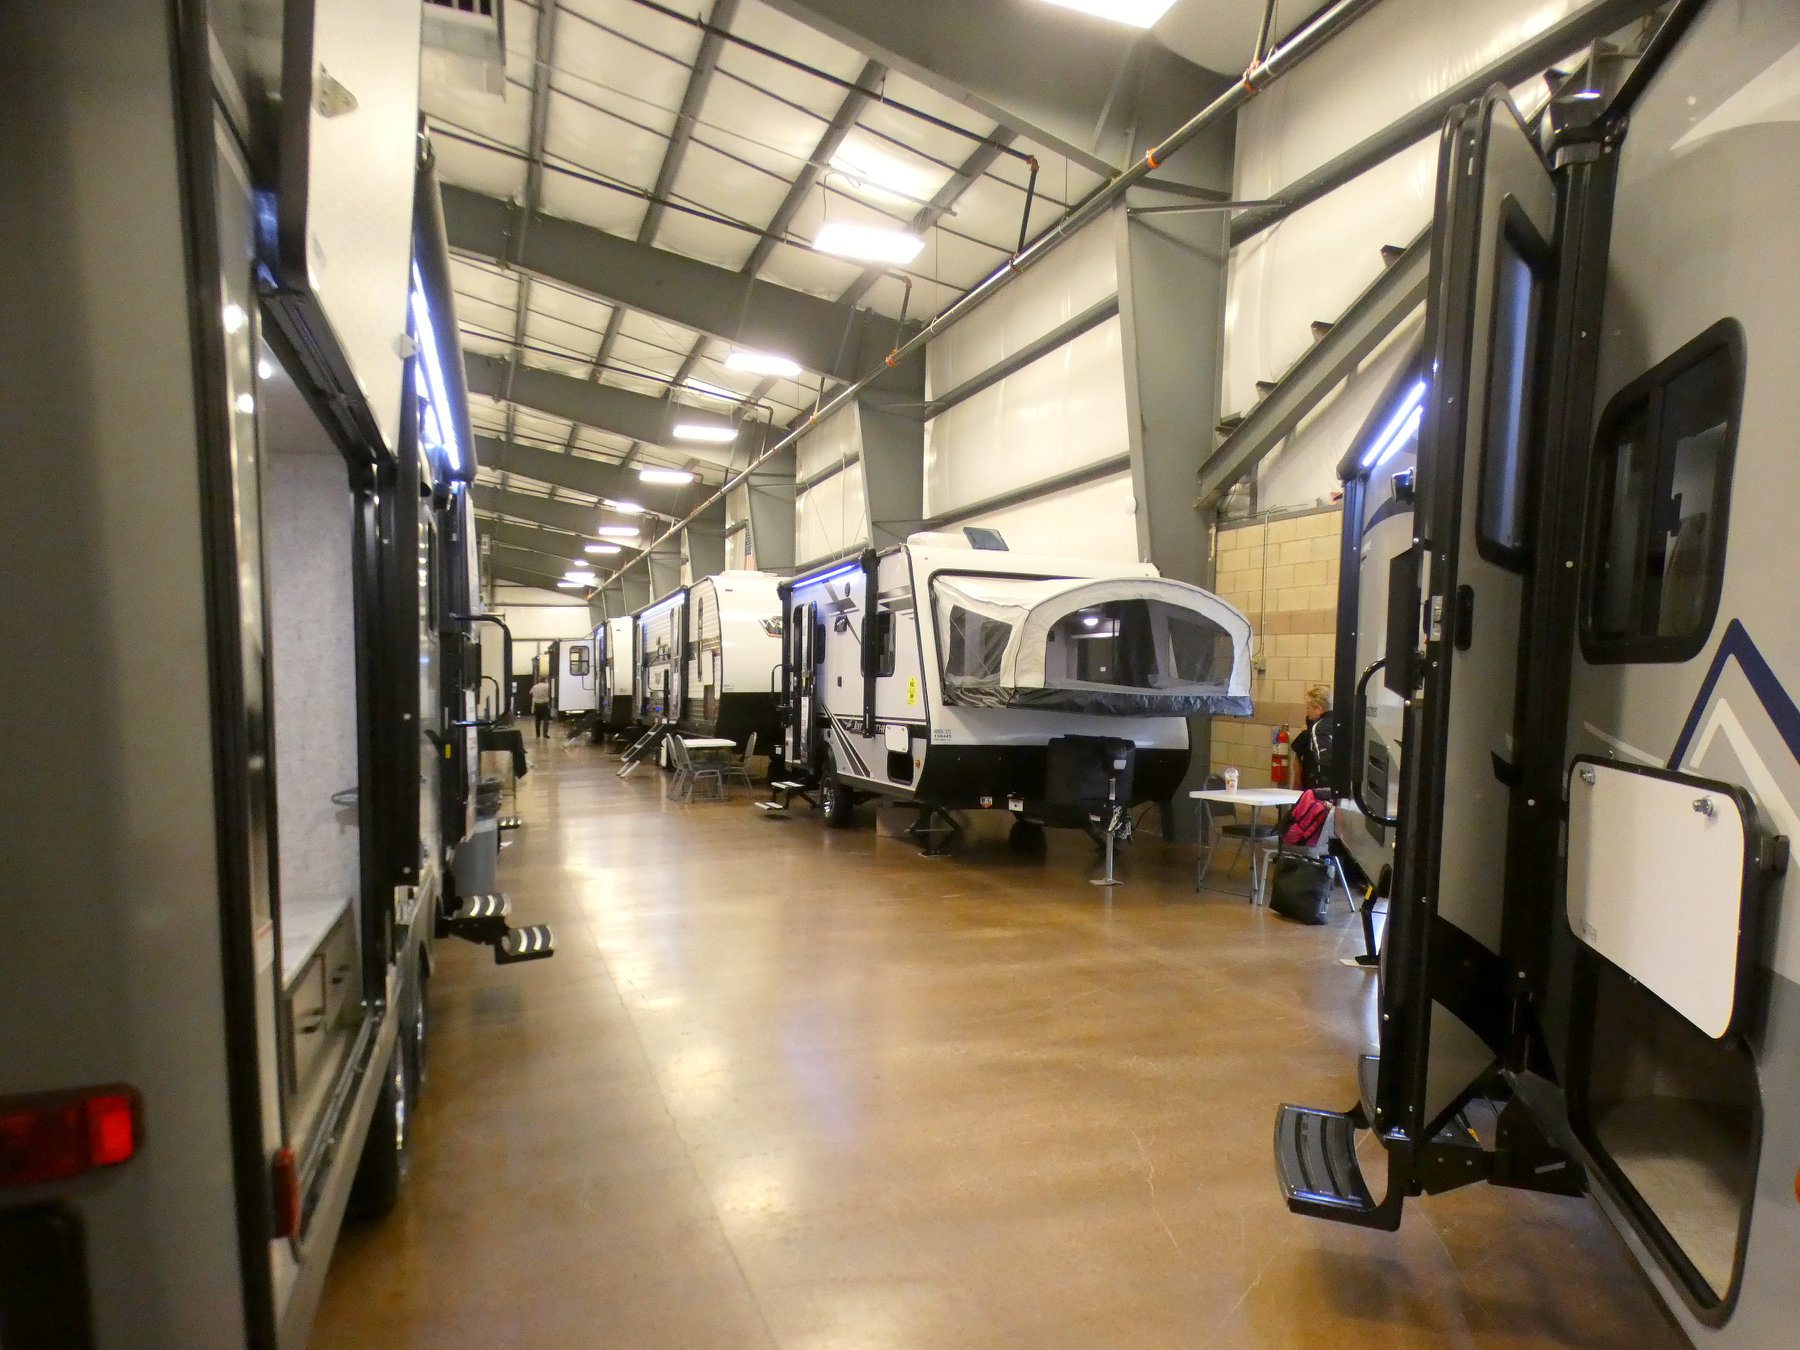 Lake County RV Outlet Show at the Lake County Fairgrounds